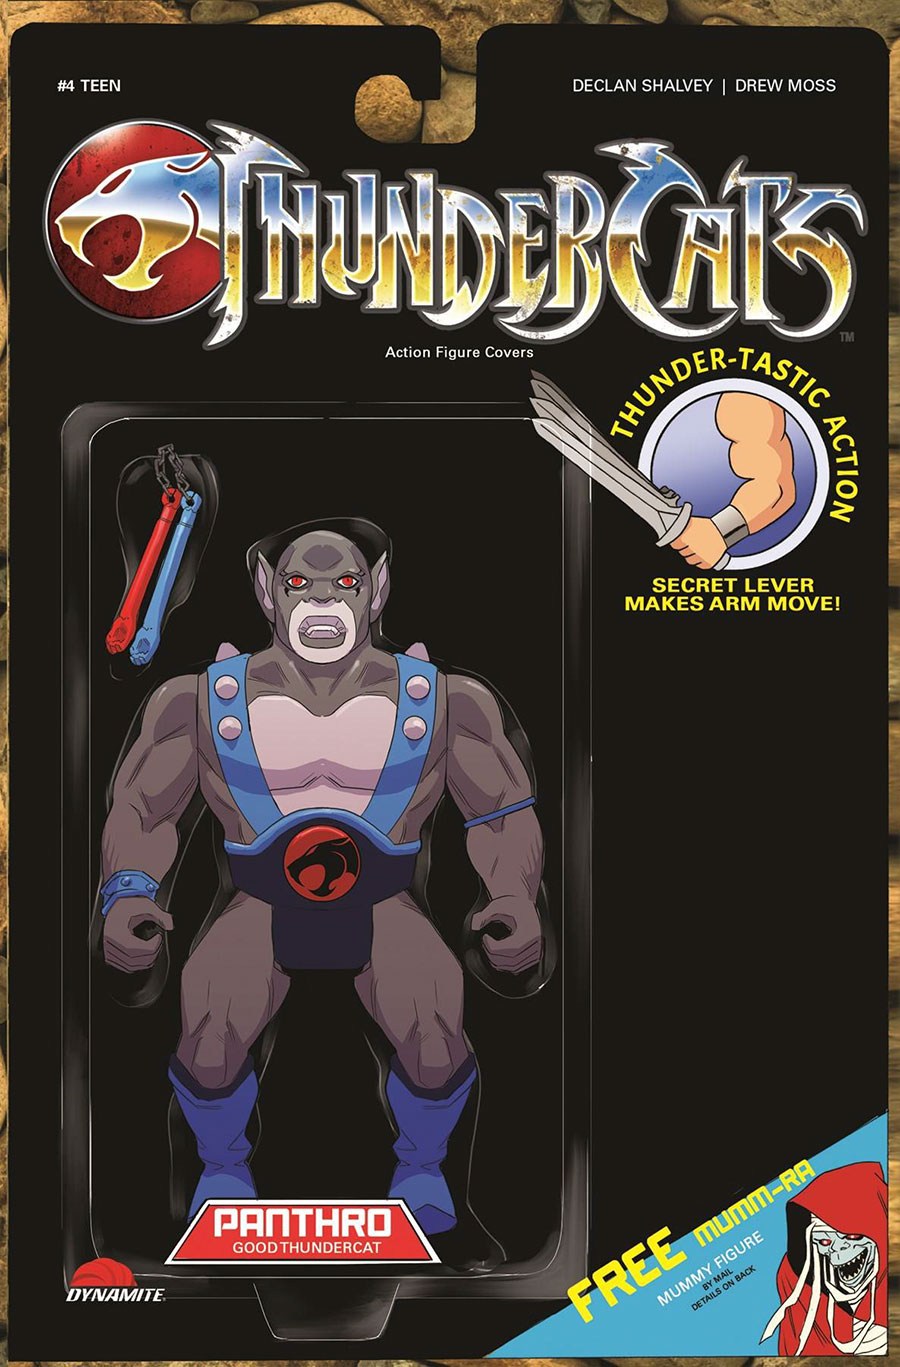 Thundercats Vol 3 #4 Cover F Variant Action Figure Cover